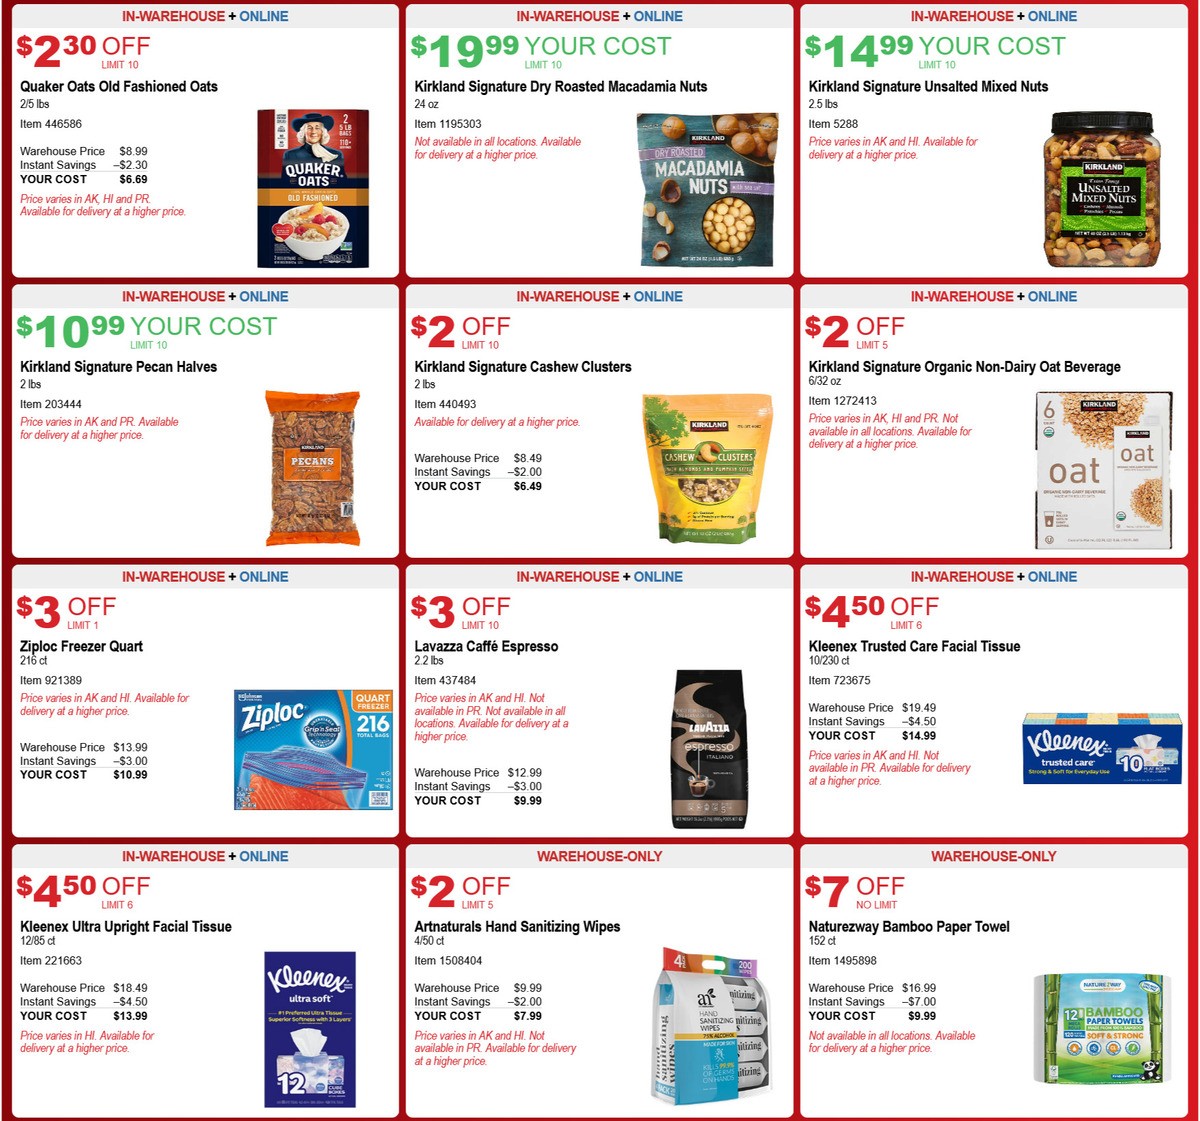 Costco Hot Buys Special Buys and Warehouse Savings for February 27 Page 2